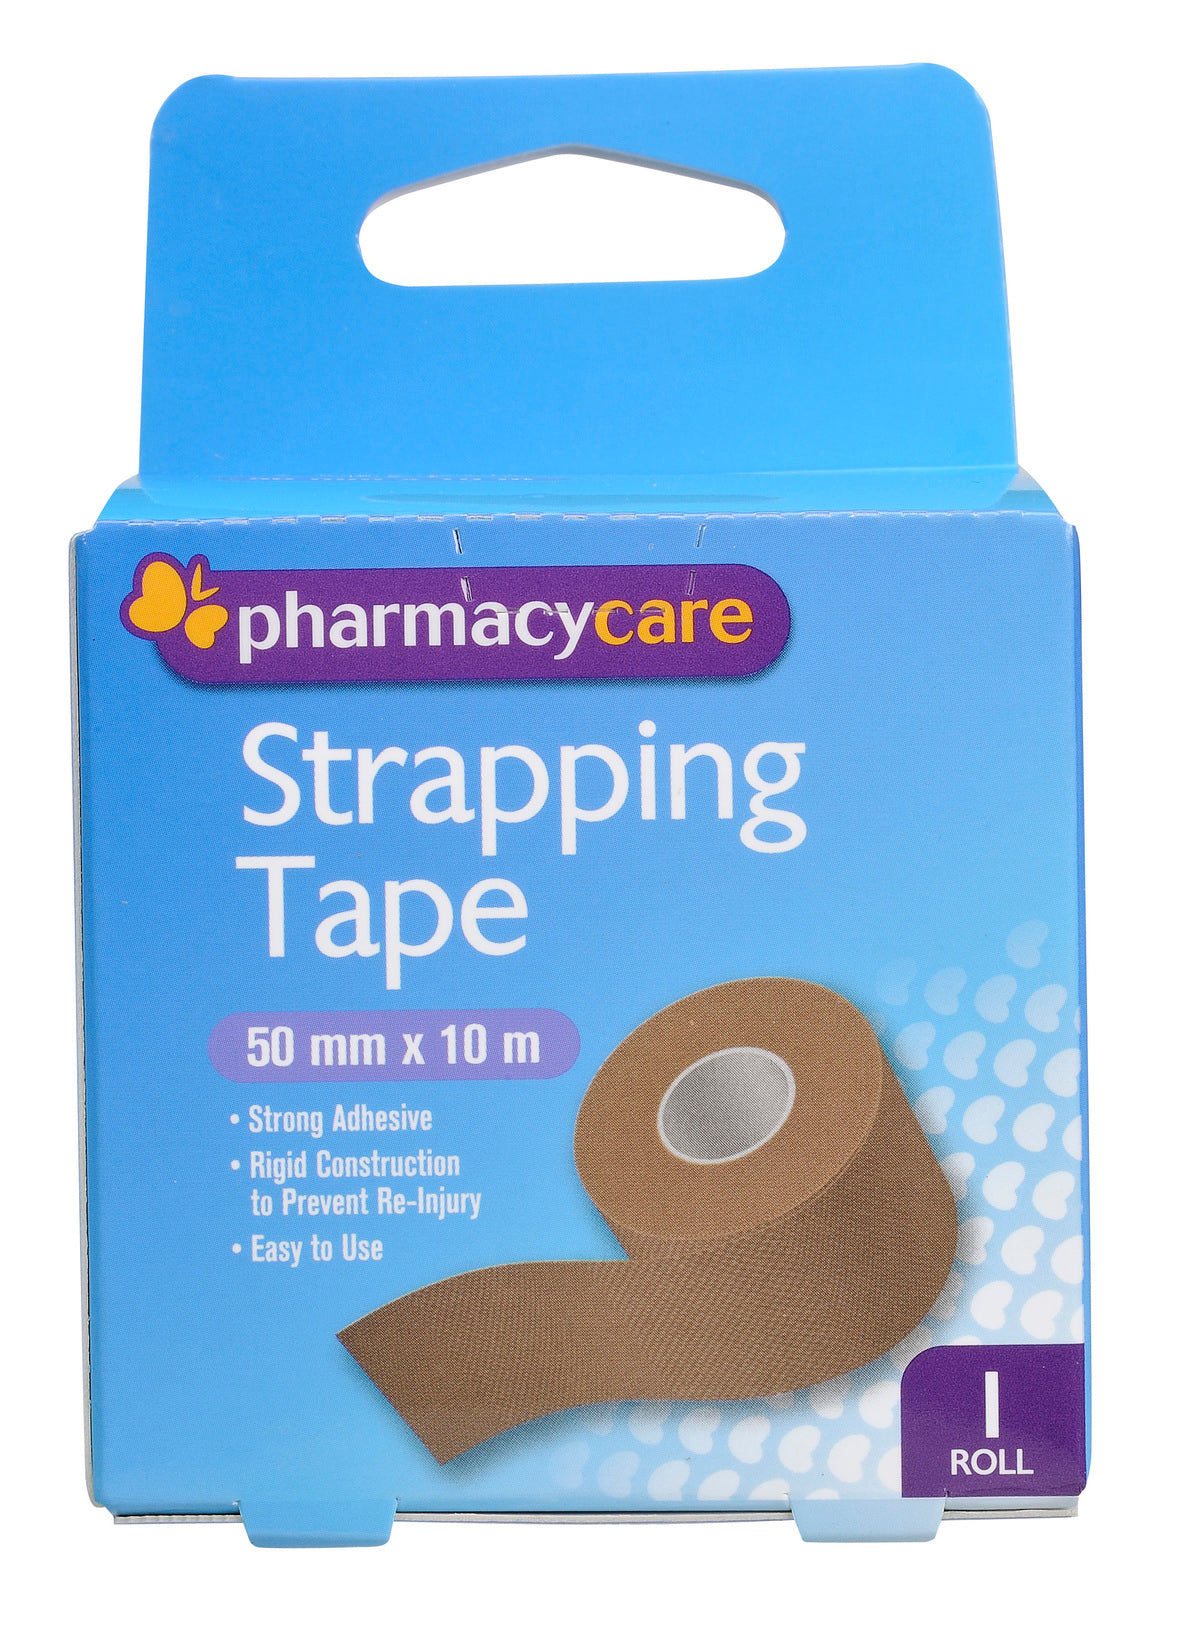 Pharmacy Care Strapping Tape 50mmx10m